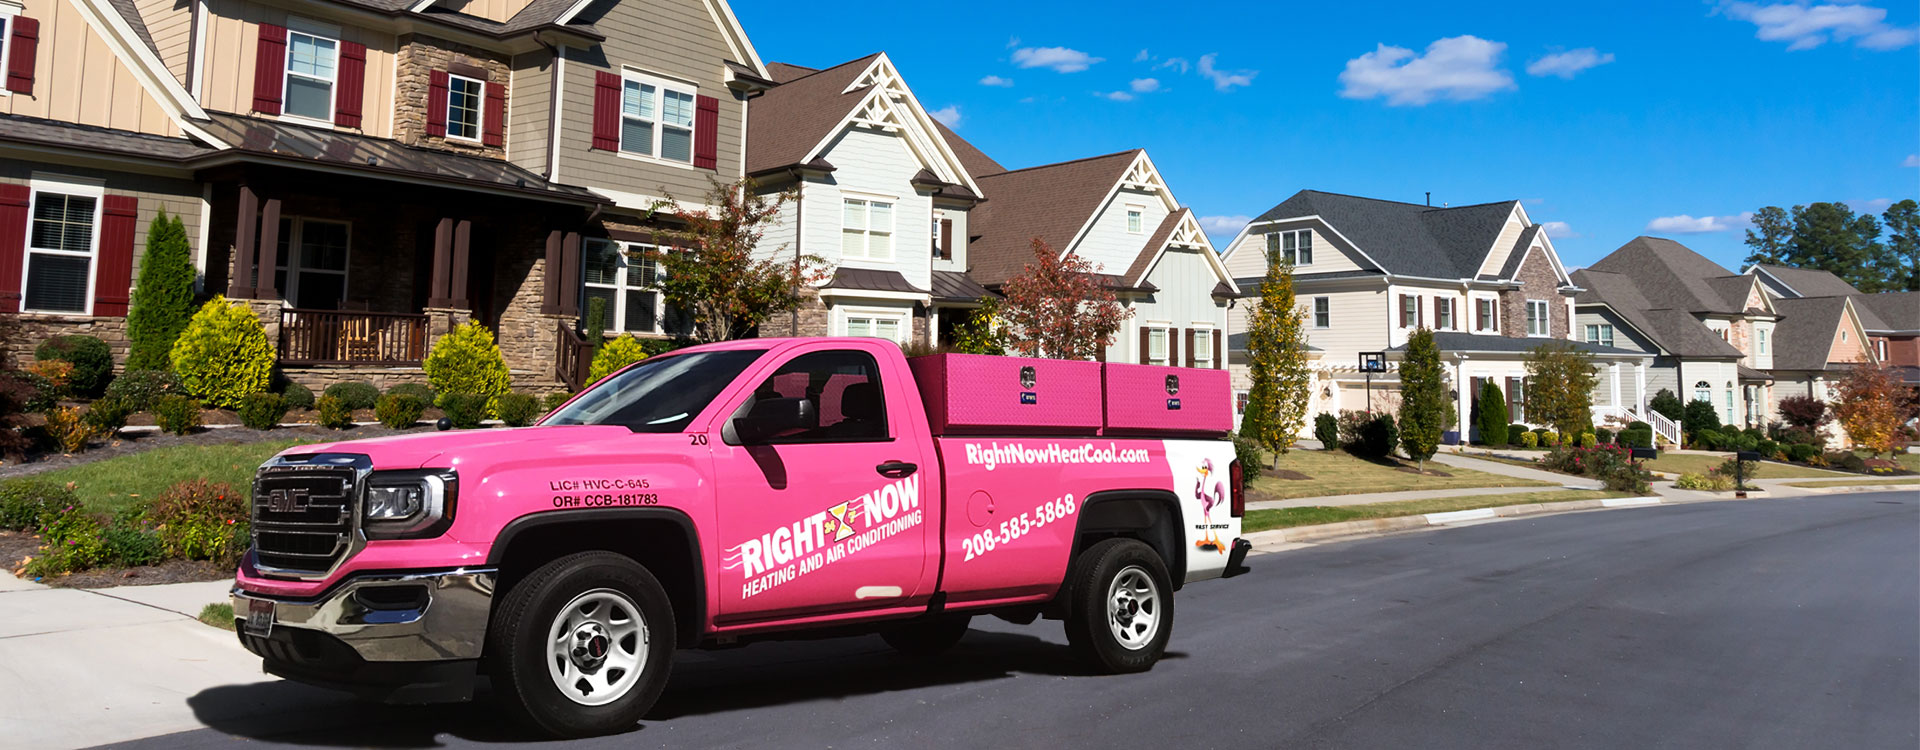 Right Now Heating and Air Conditioning reviews | 55 Rich Ln - Blackfoot ID